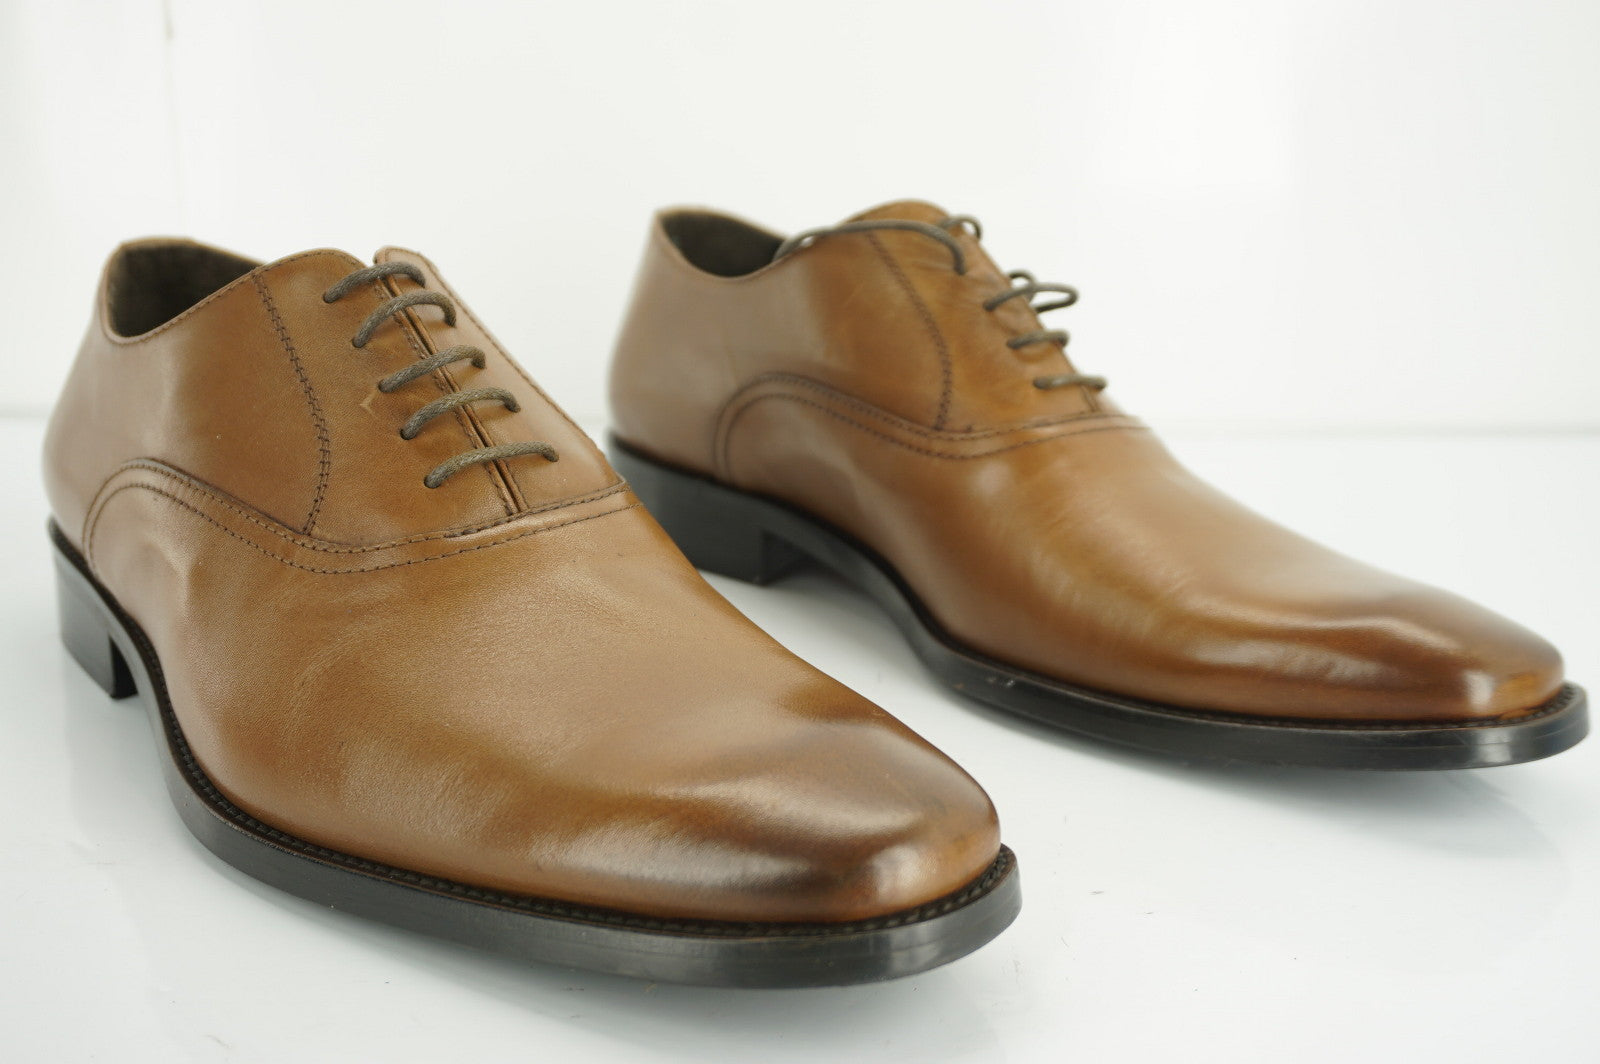 To Boot New York Gallagher Leather Plain Toe Derby Oxfords SZ 11 lace up $350